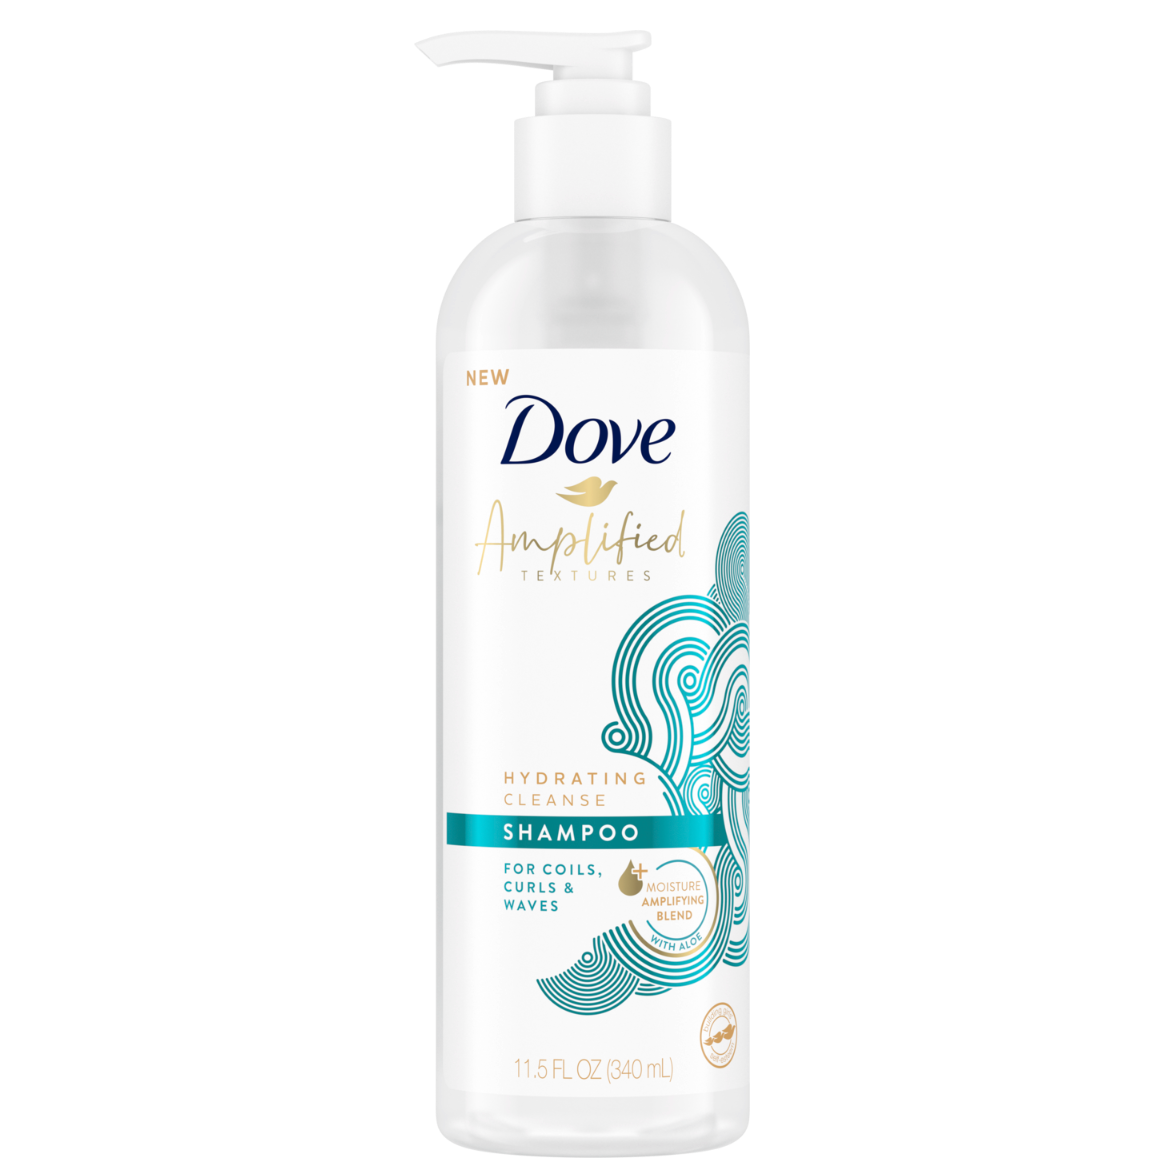 Dove Amplified Textures Shampoo 340ml